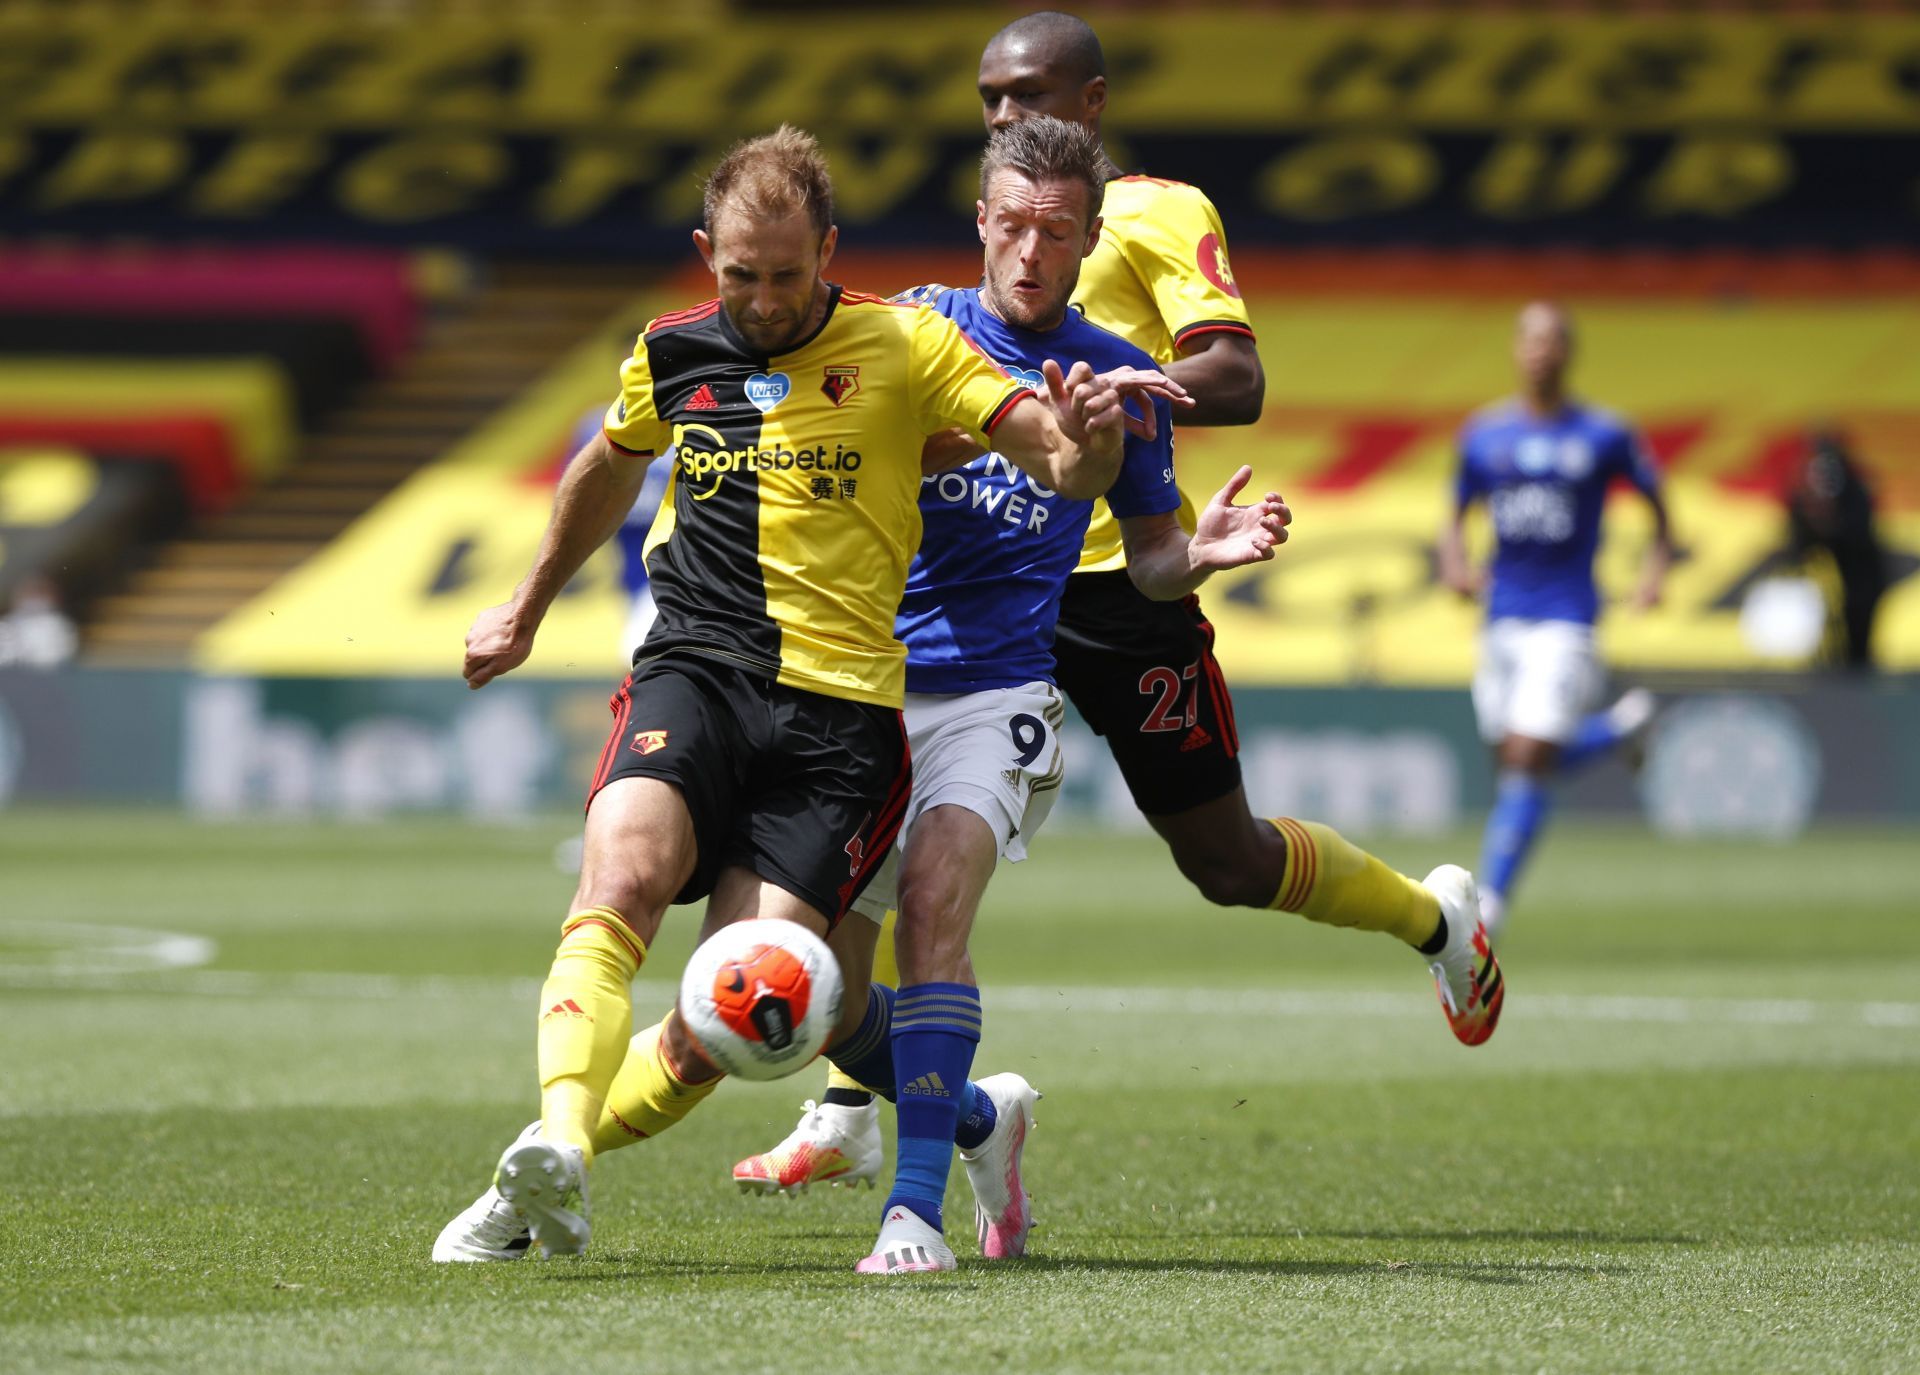 Watford take on Leicester City this weekend